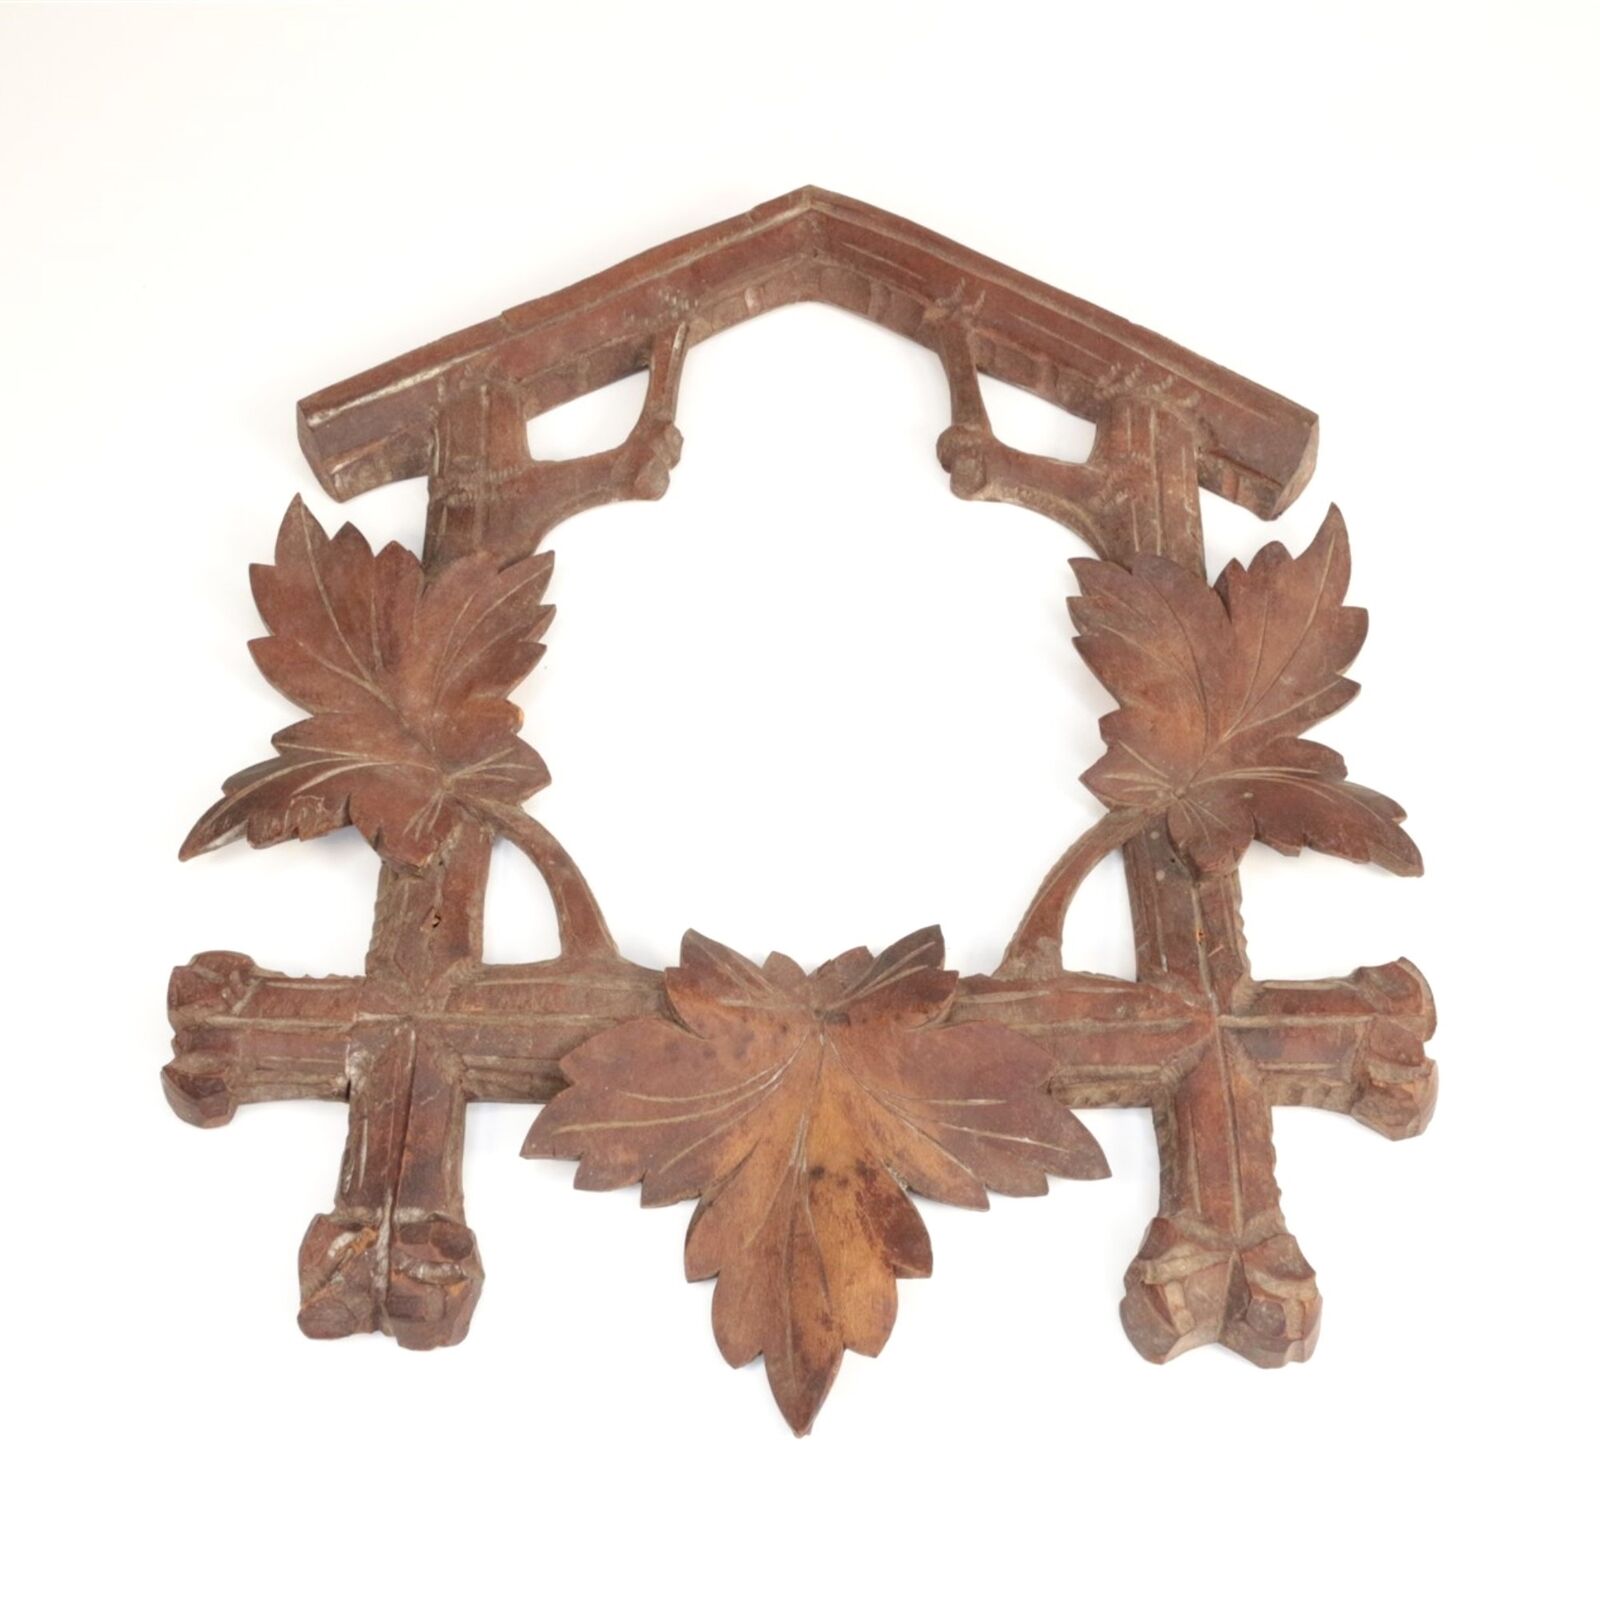 Cuckoo Clock Case Front Frame 13-3/8 inches Tall Antique - LW443